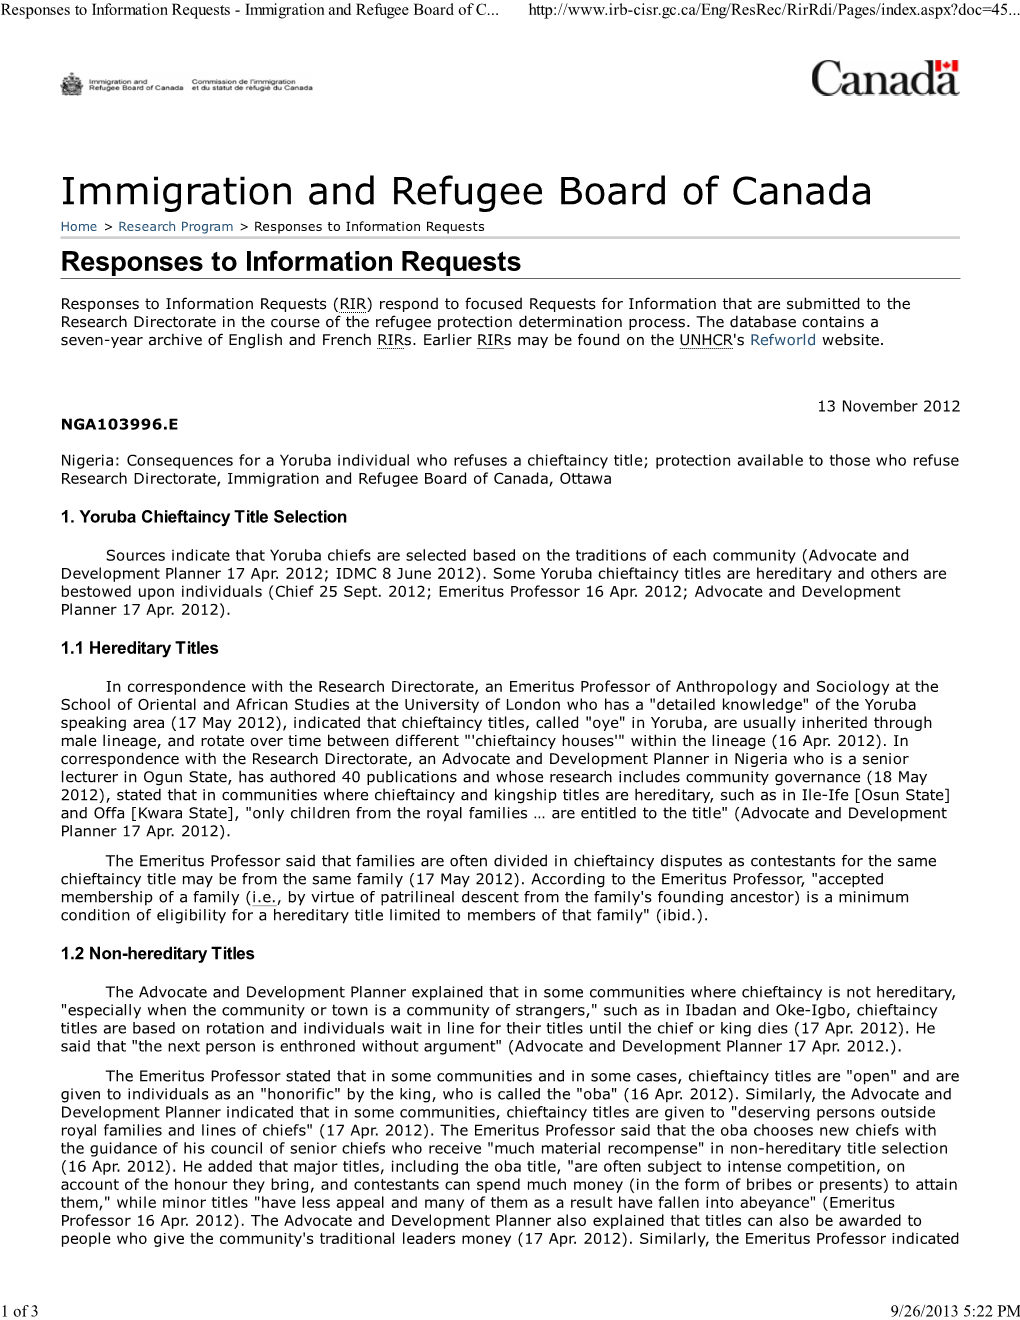 Immigration and Refugee Board of Canada, Ottawa